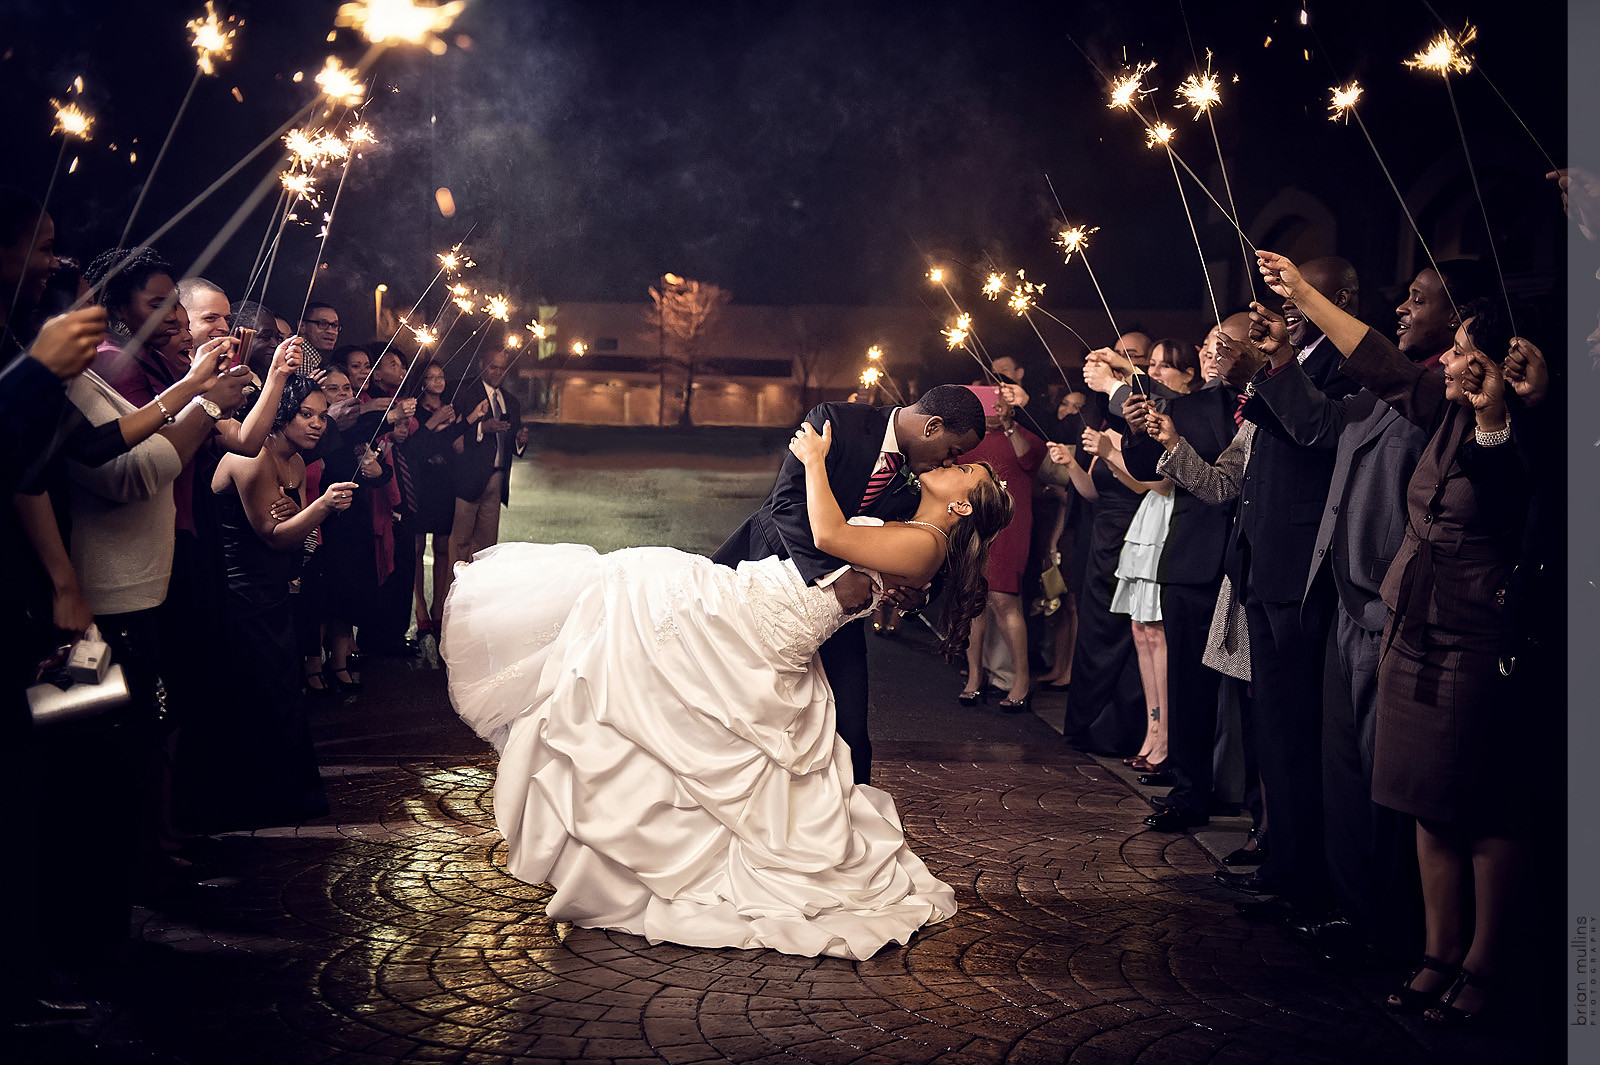 How To Photograph Sparklers At A Wedding
 How the Wrong Sparklers Almost Cost Me My Wedding